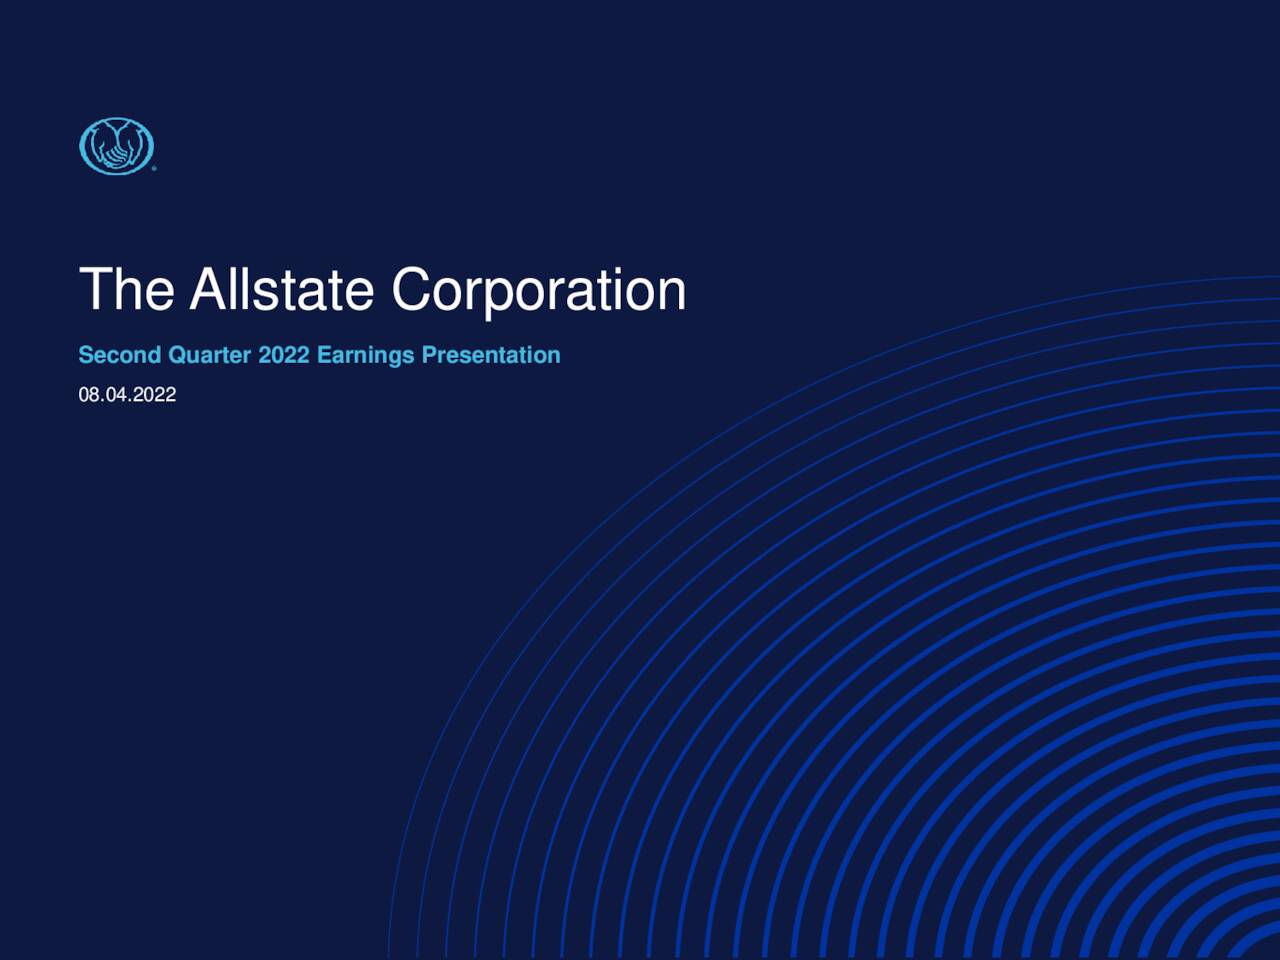 The Allstate Corporation 2022 Q2 Results Earnings Call Presentation